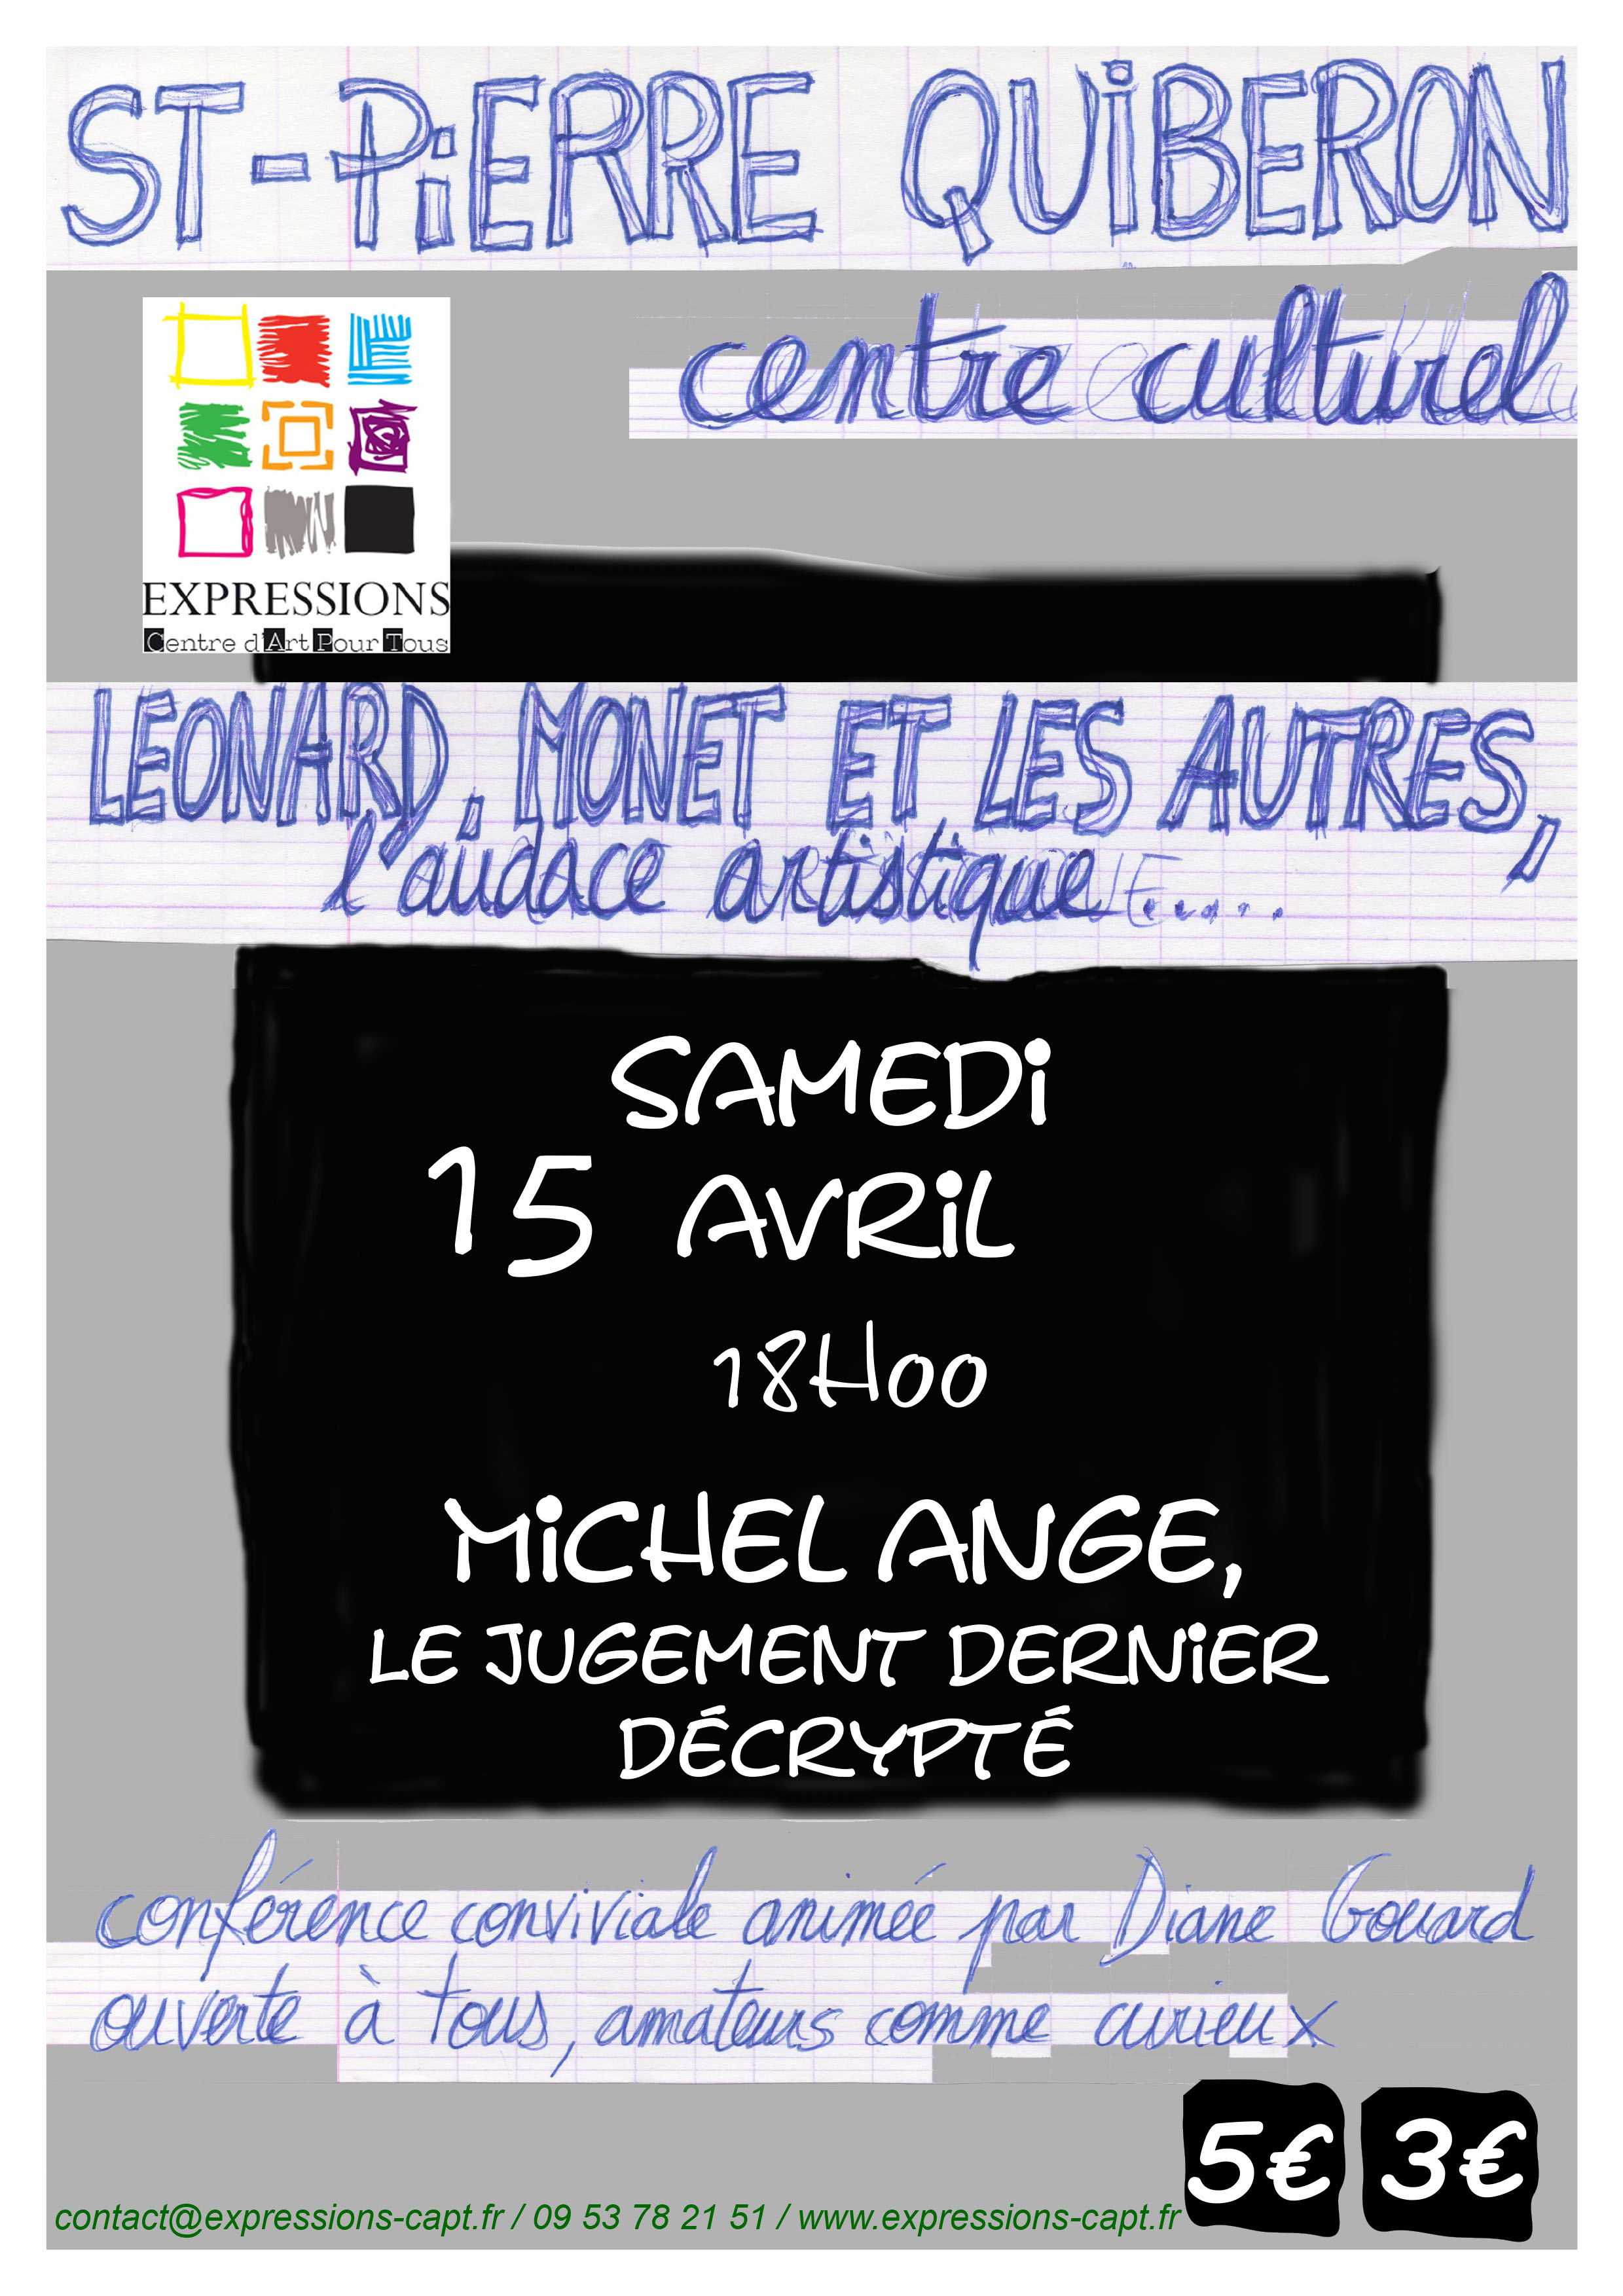 2017 04 15 Affiche Confrence